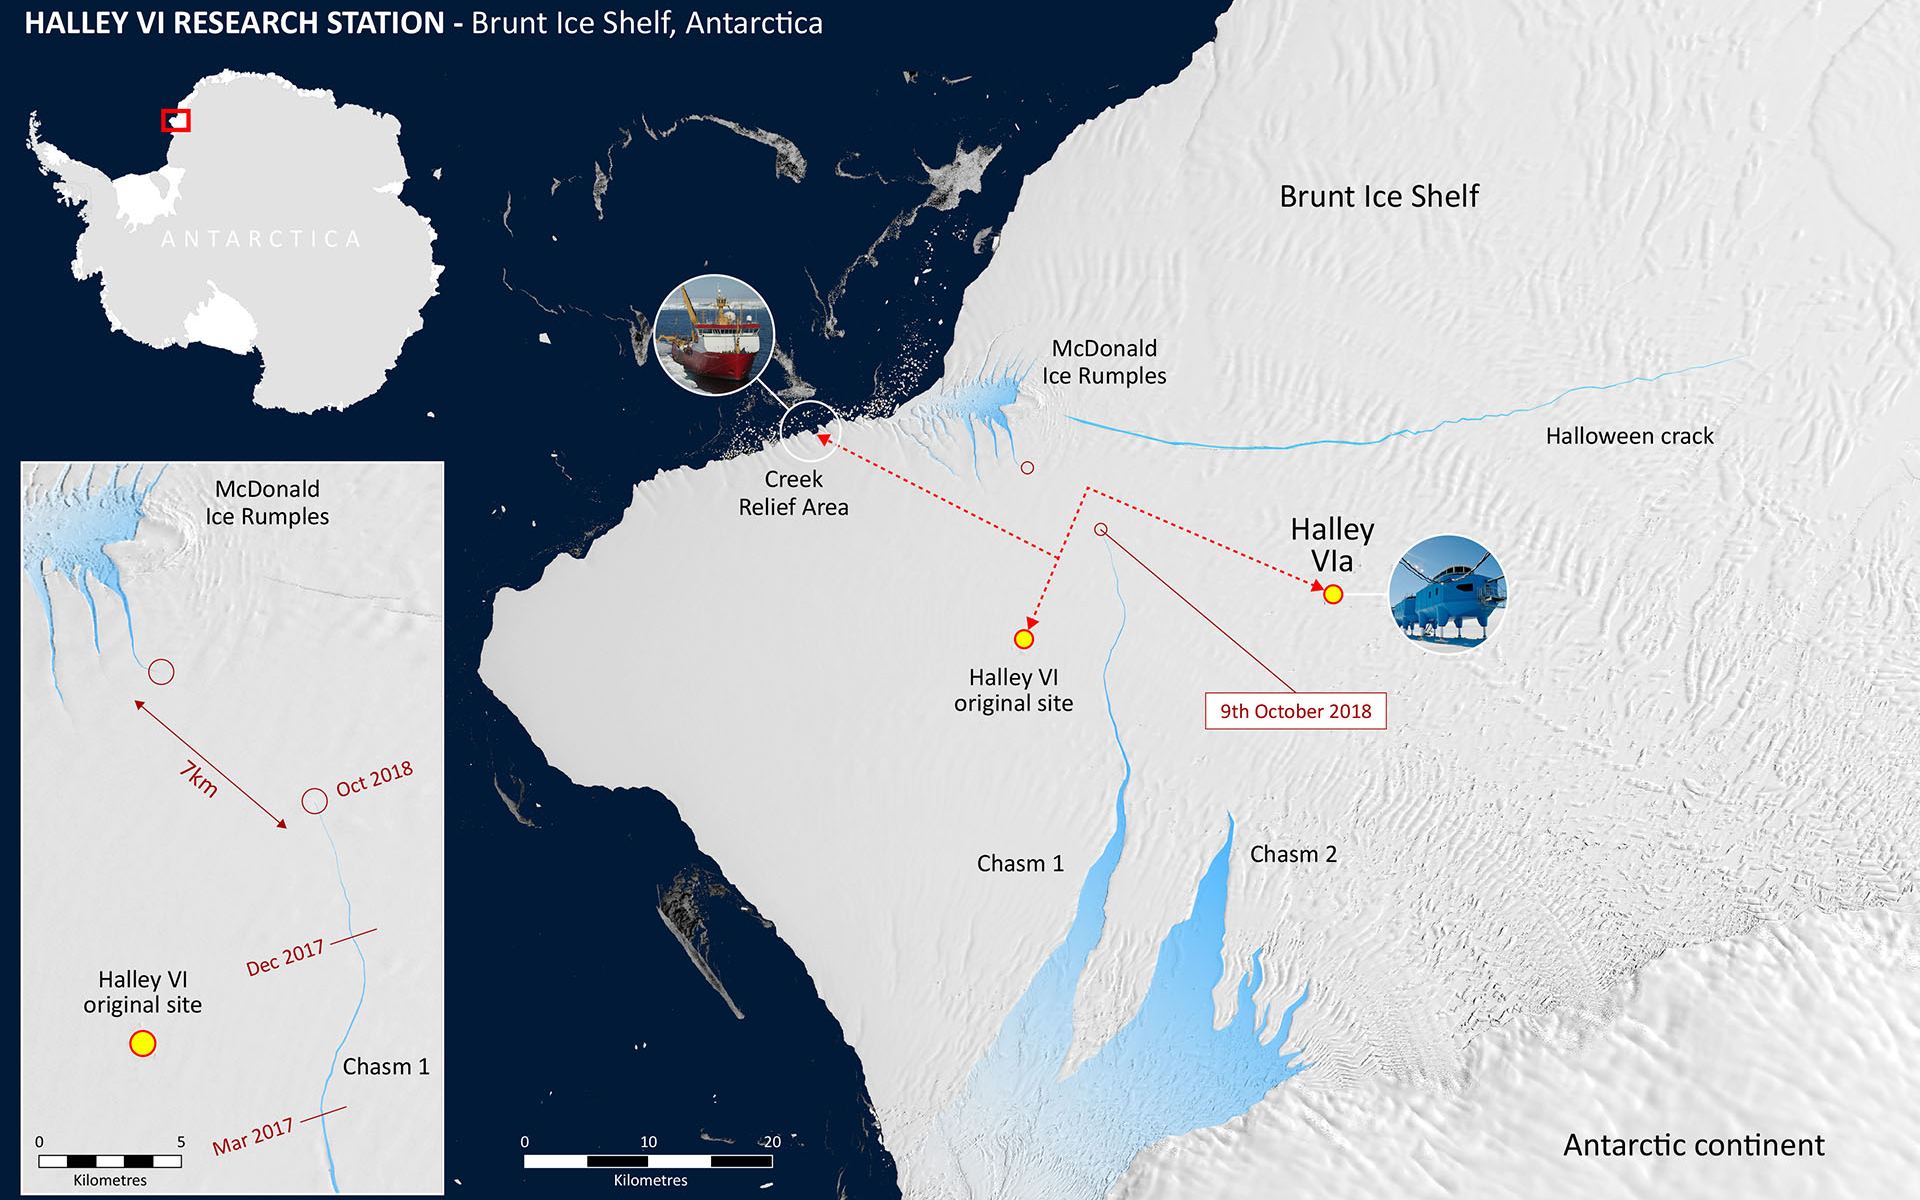 The Brunt Ice Shelf is about to calve an ice berg more than twice as large as New York City. Image: British Antarctic Survey.